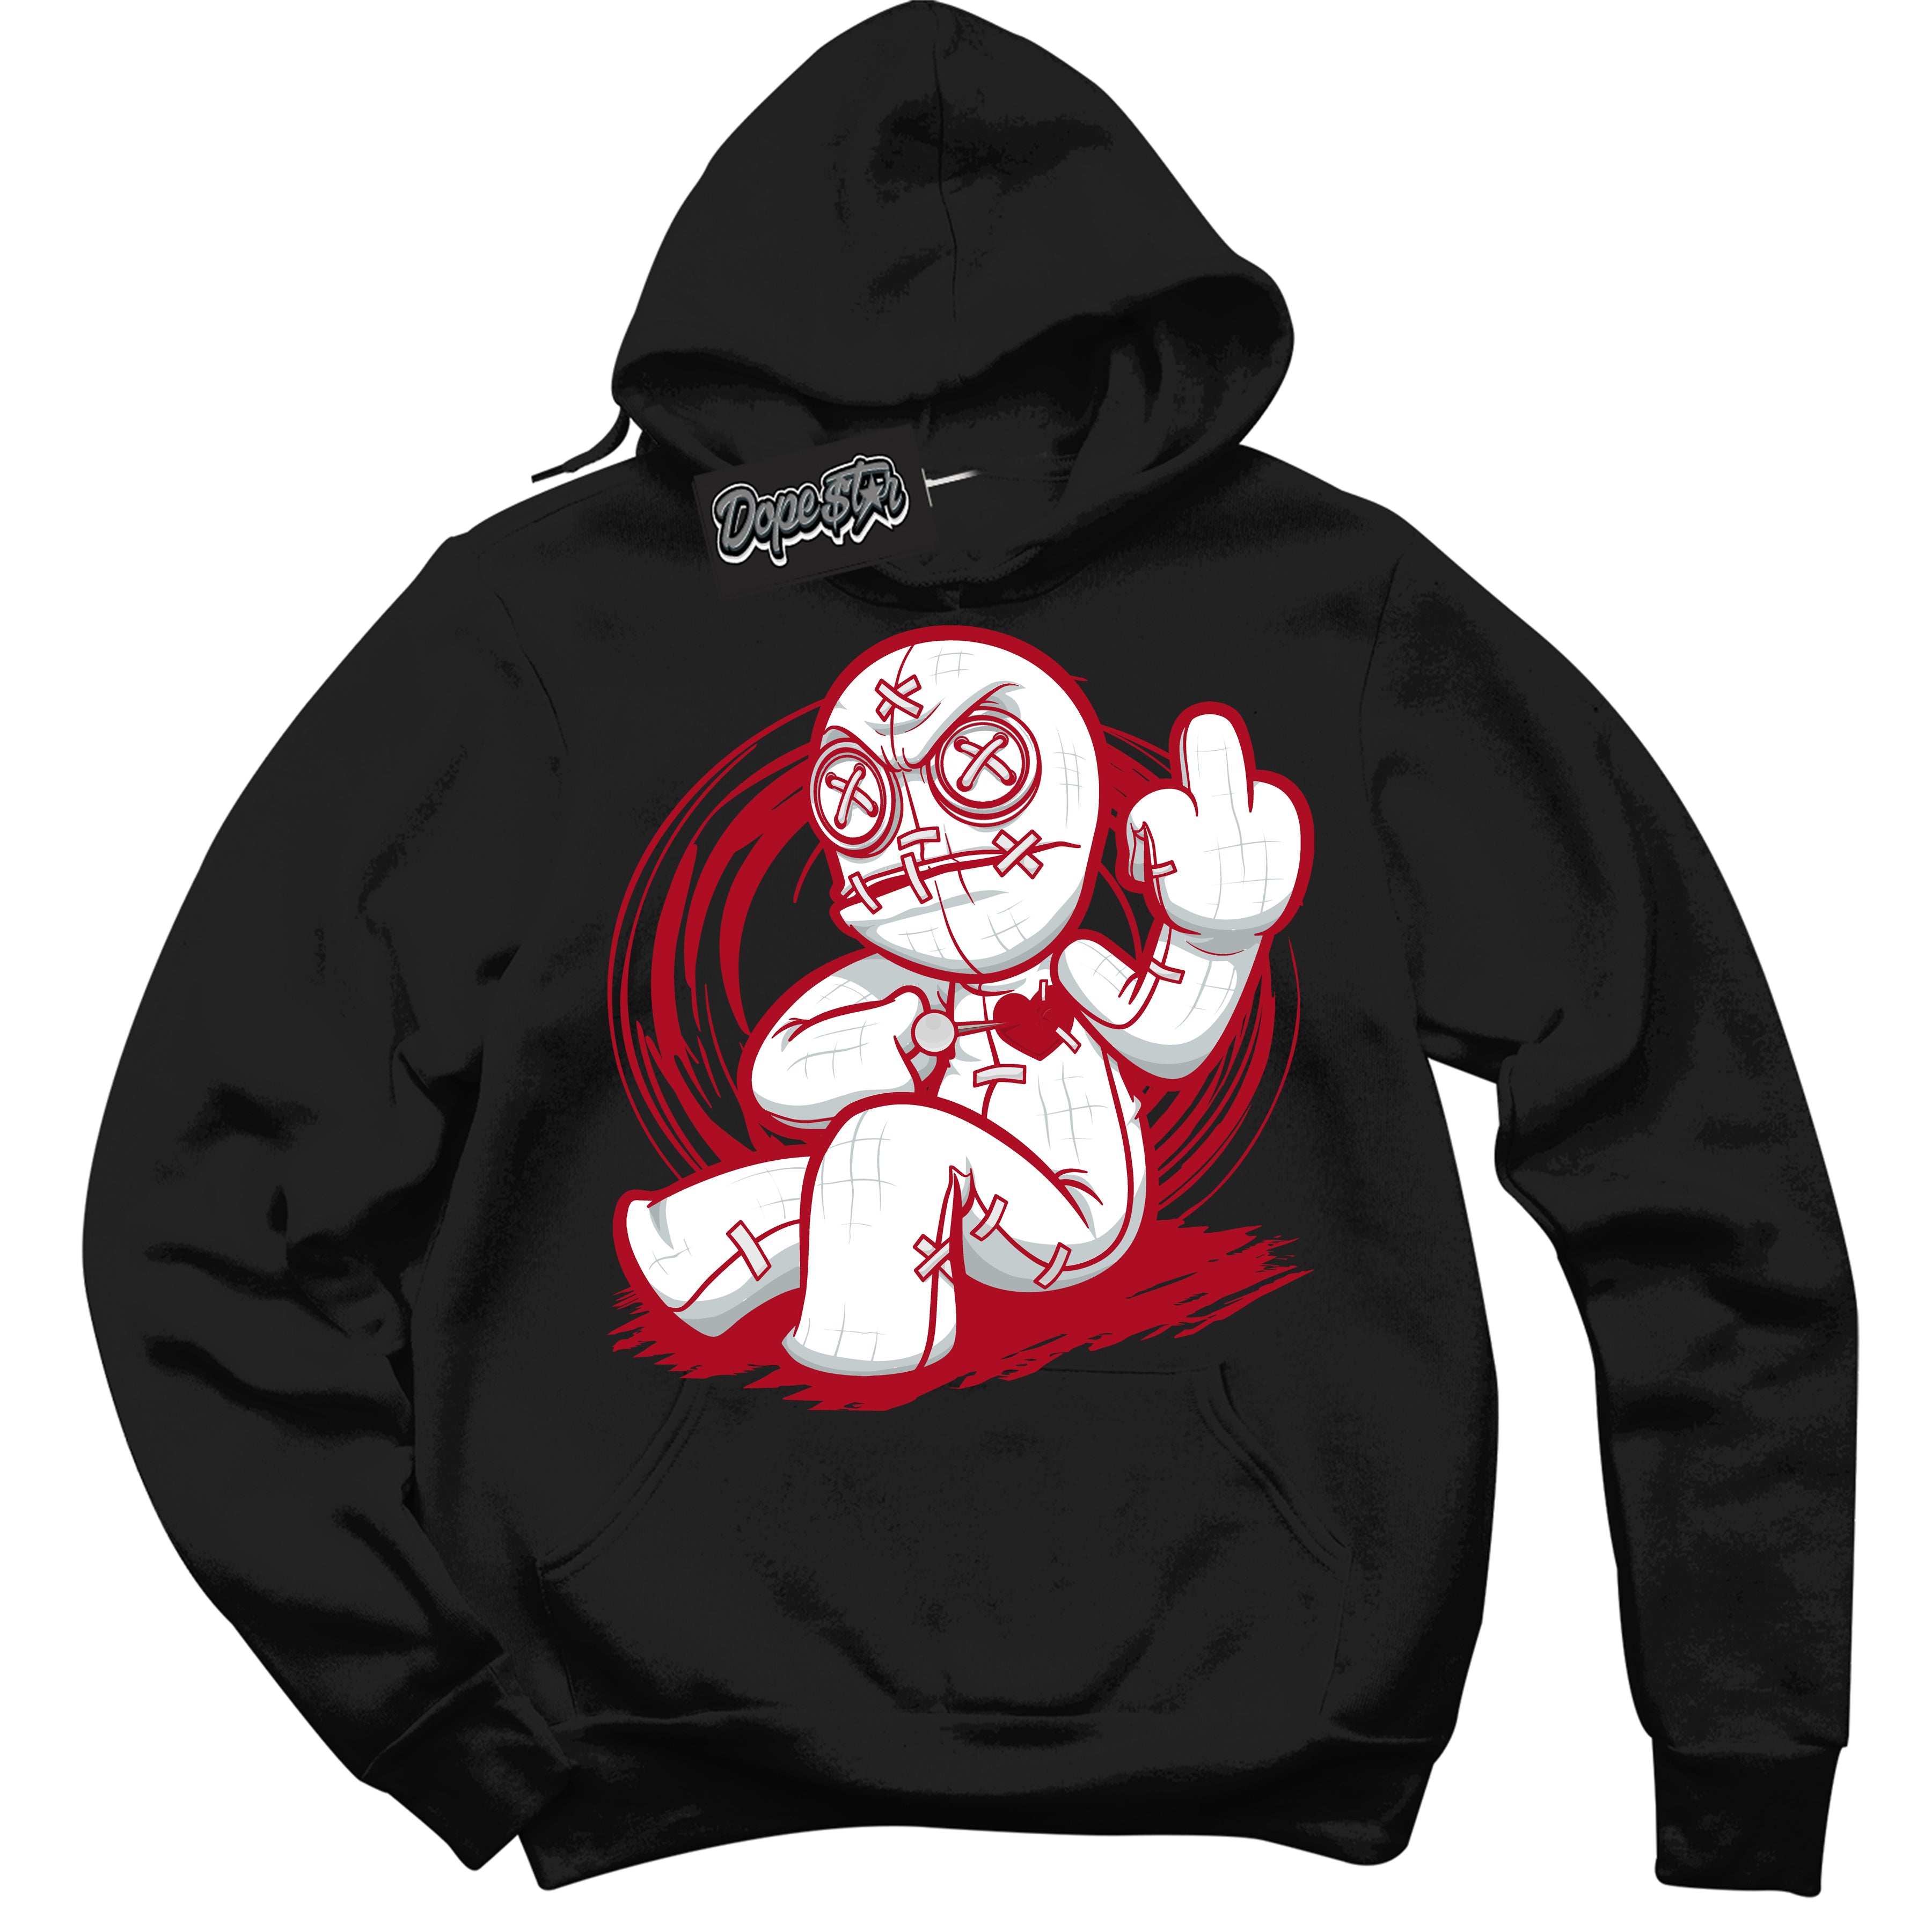 Cool Black Hoodie with “ VooDoo Doll ”  design that Perfectly Matches  Reverse Ultraman Sneakers.